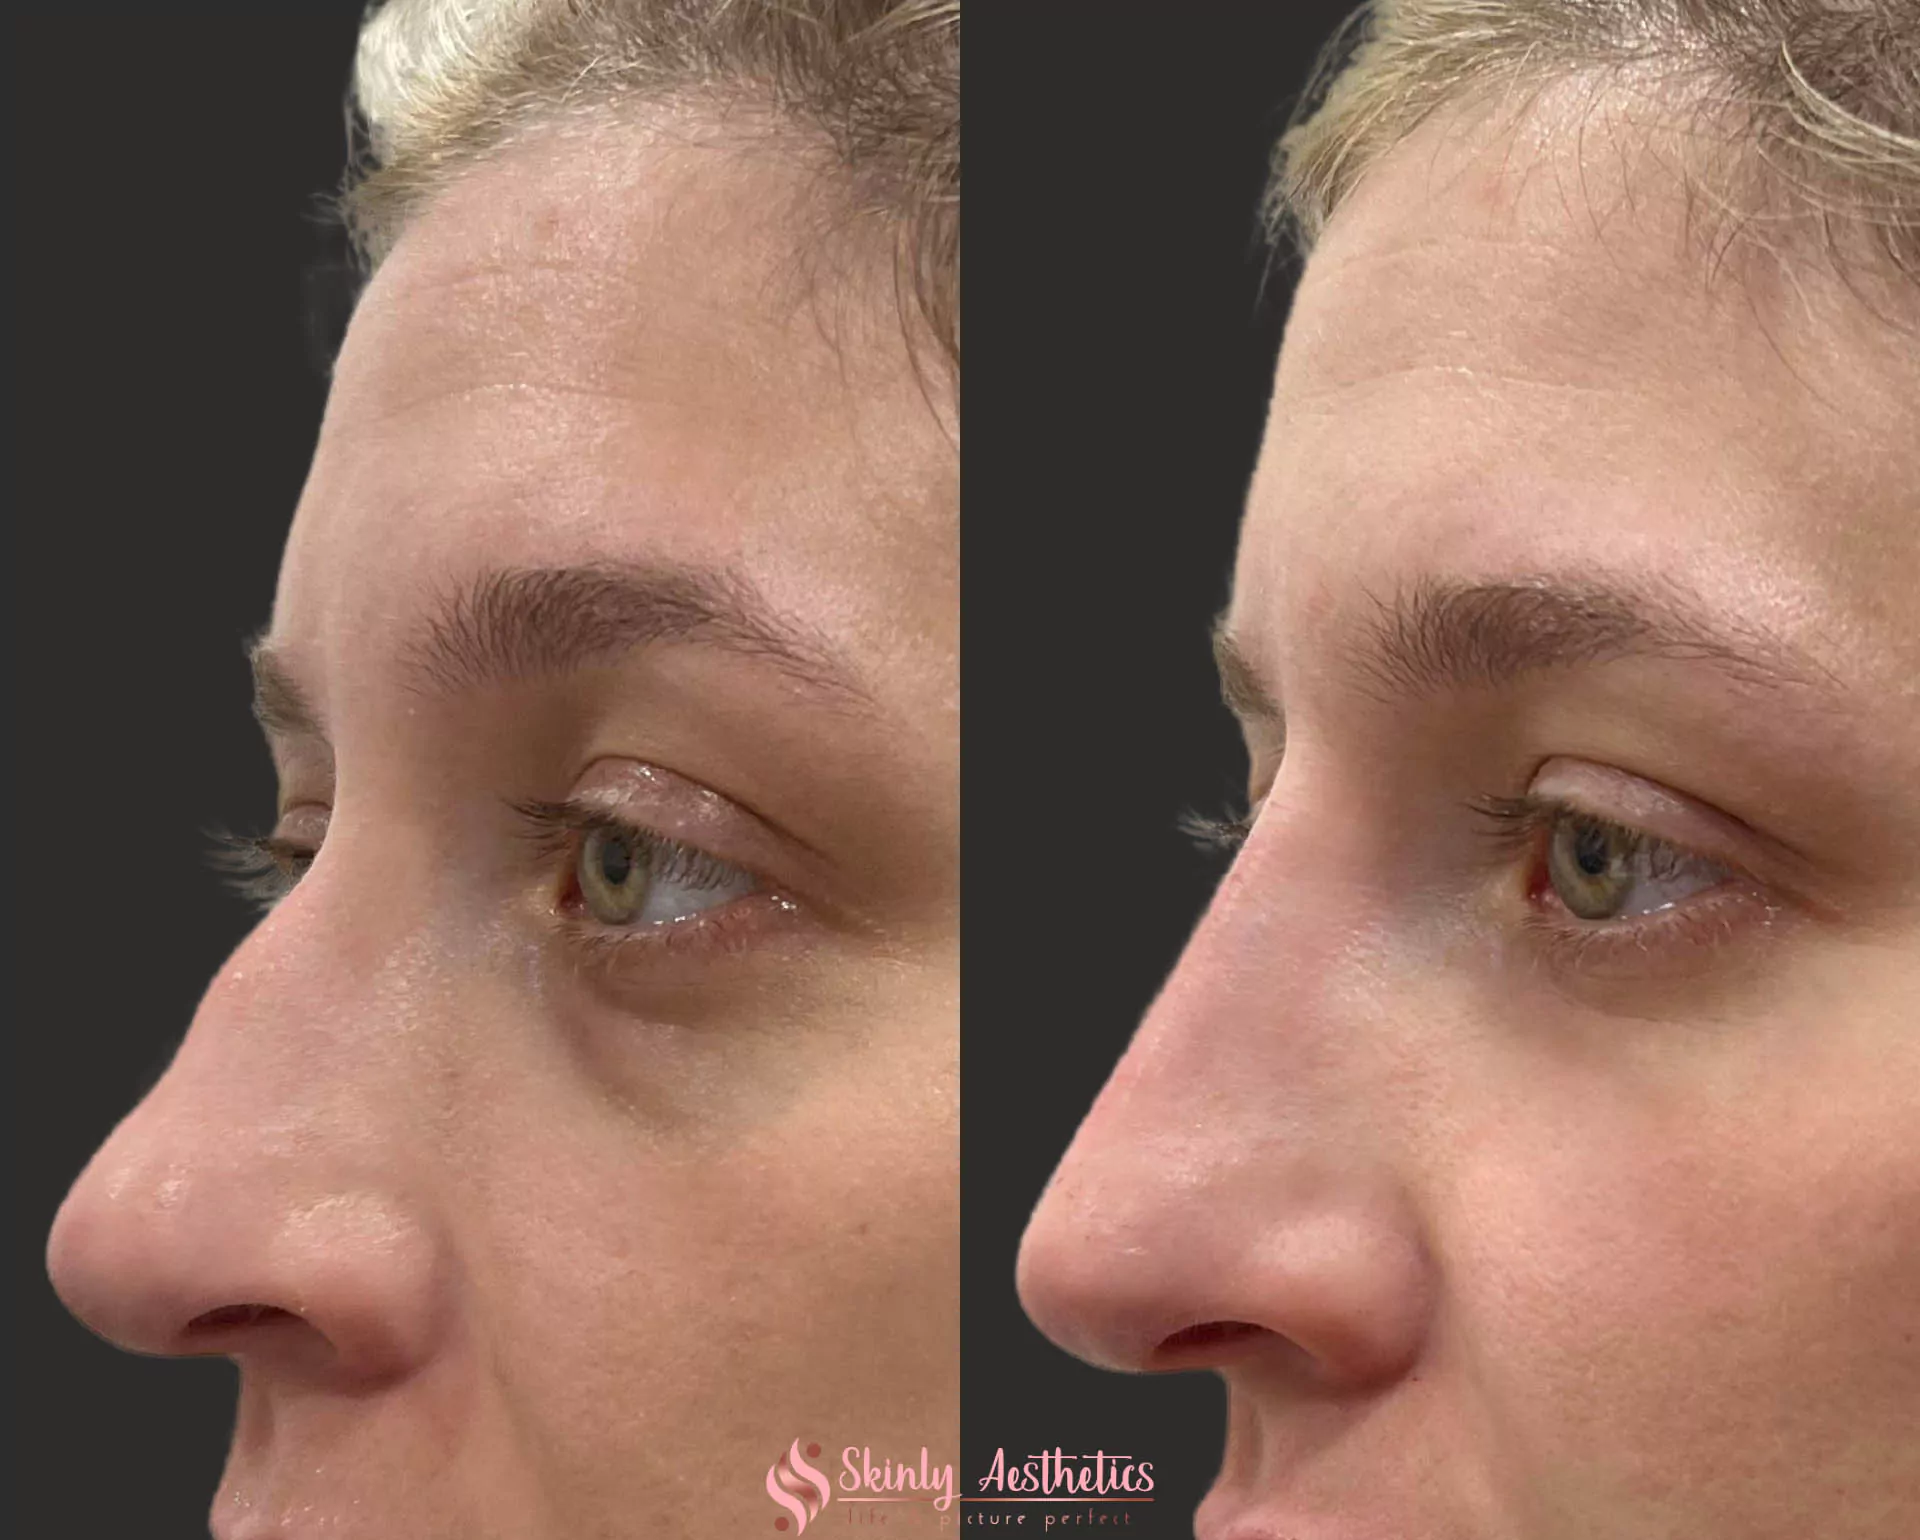 non surgical rhinoplasty results to fix crooked and bumpy nose